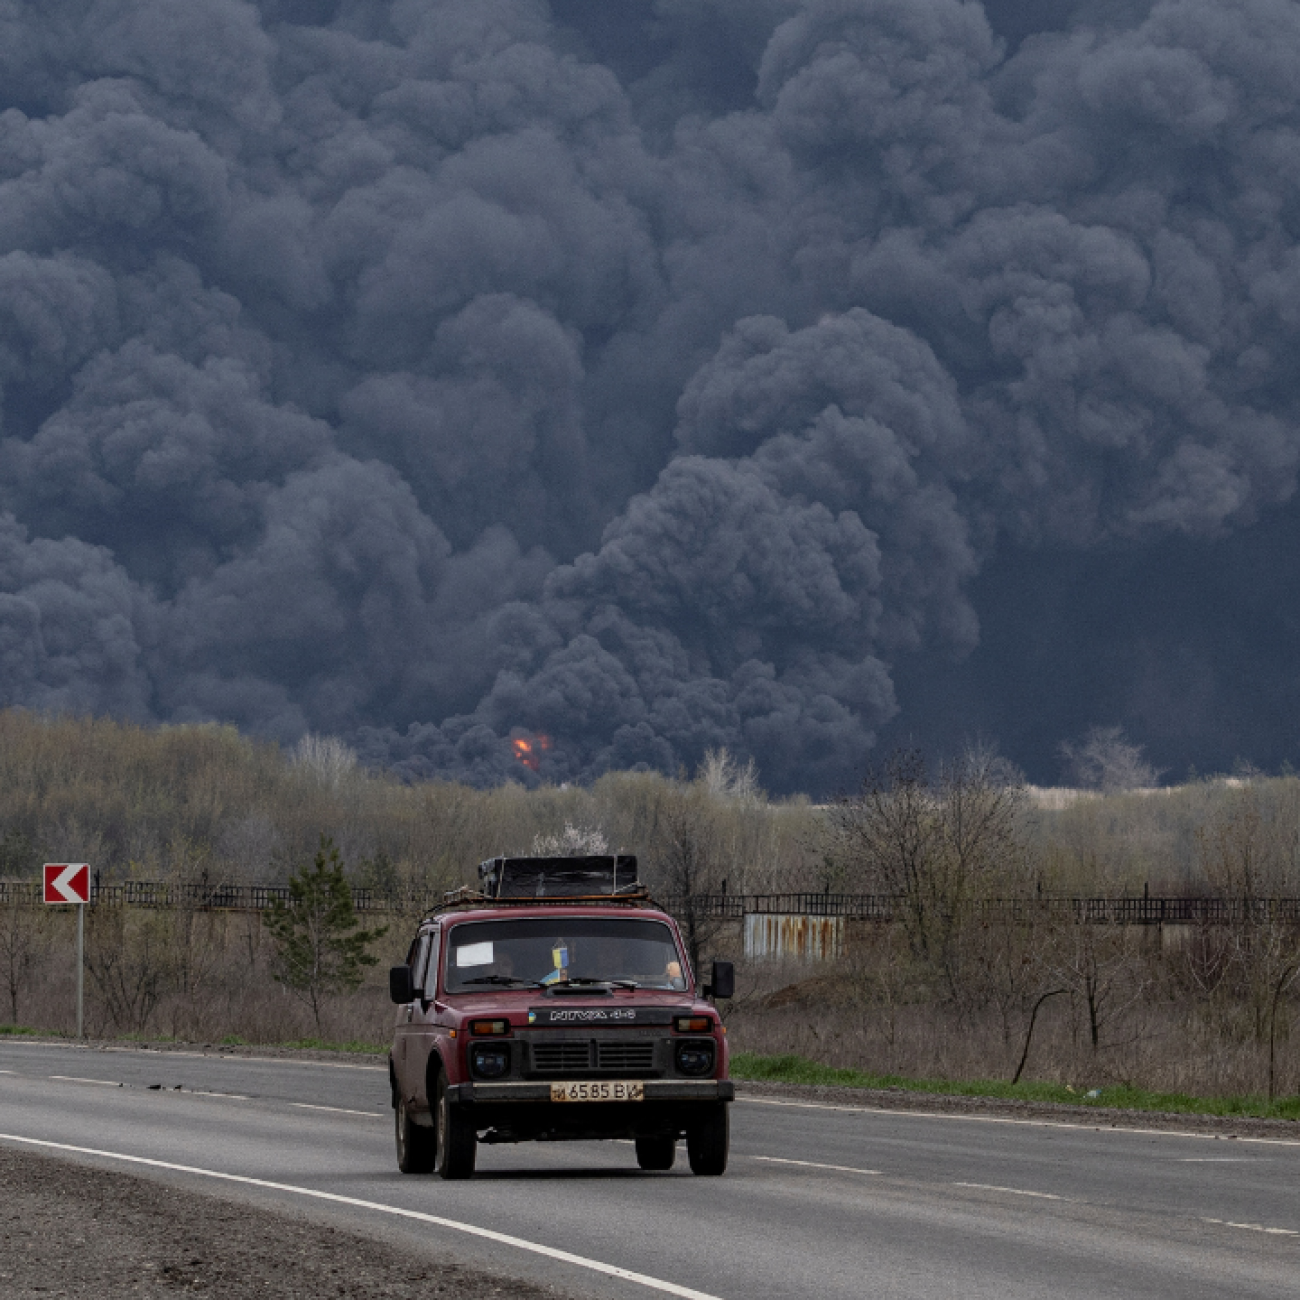 Plumes of black smoke rise up into the air behind a car as it passes the Lysychansk Oil Refinery after if was hit by a missile at Lysychansk, in the Luhansk region, Ukraine, on April 16, 2022. REUTERS/Marko Djurica